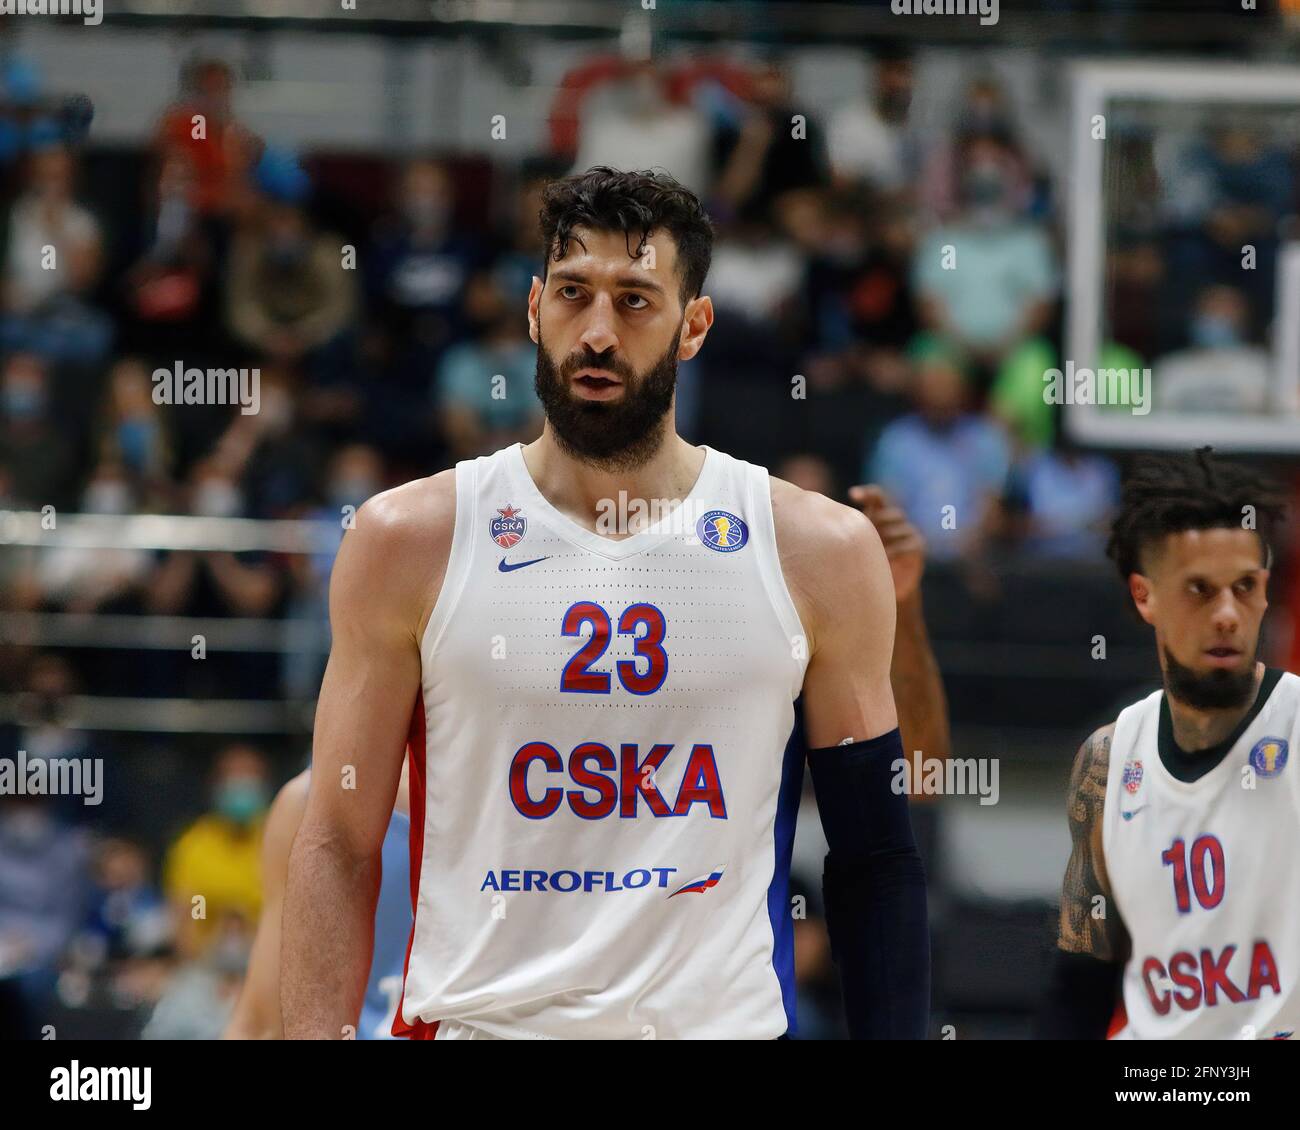 Saint Petersburg, Russia. 19th May, 2021. Tornike Shengelia (23) of CSKA  Moscow seen in action during the 2020/2021 VTB United League Playoffs Game  2 between Zenit Saint Petersburg and CSKA Moscow at